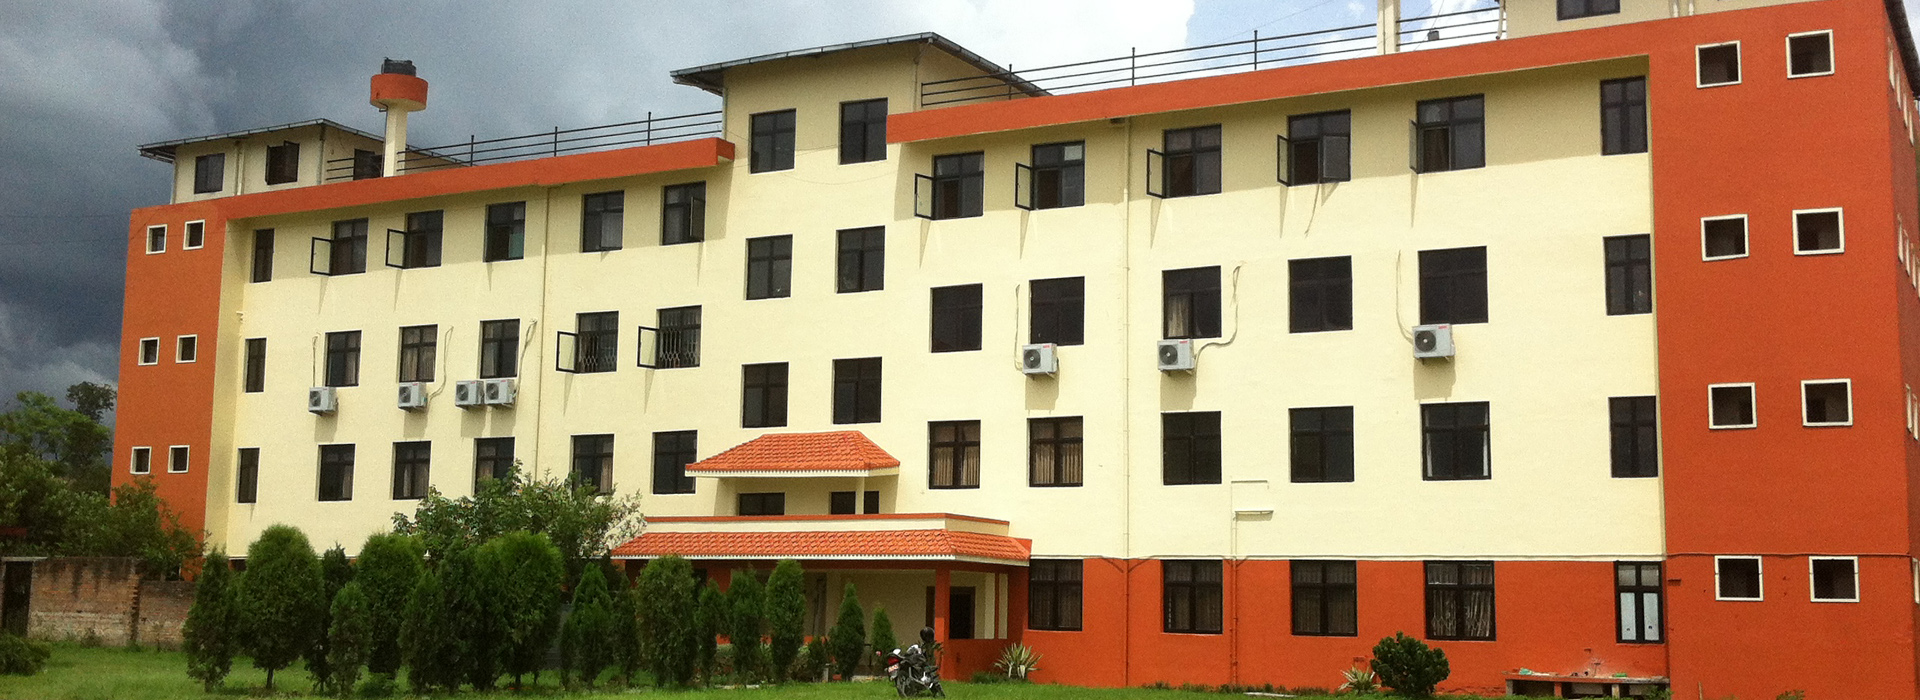 Kathmandu Medical College- MBBS Admission in Nepal for Indian Students